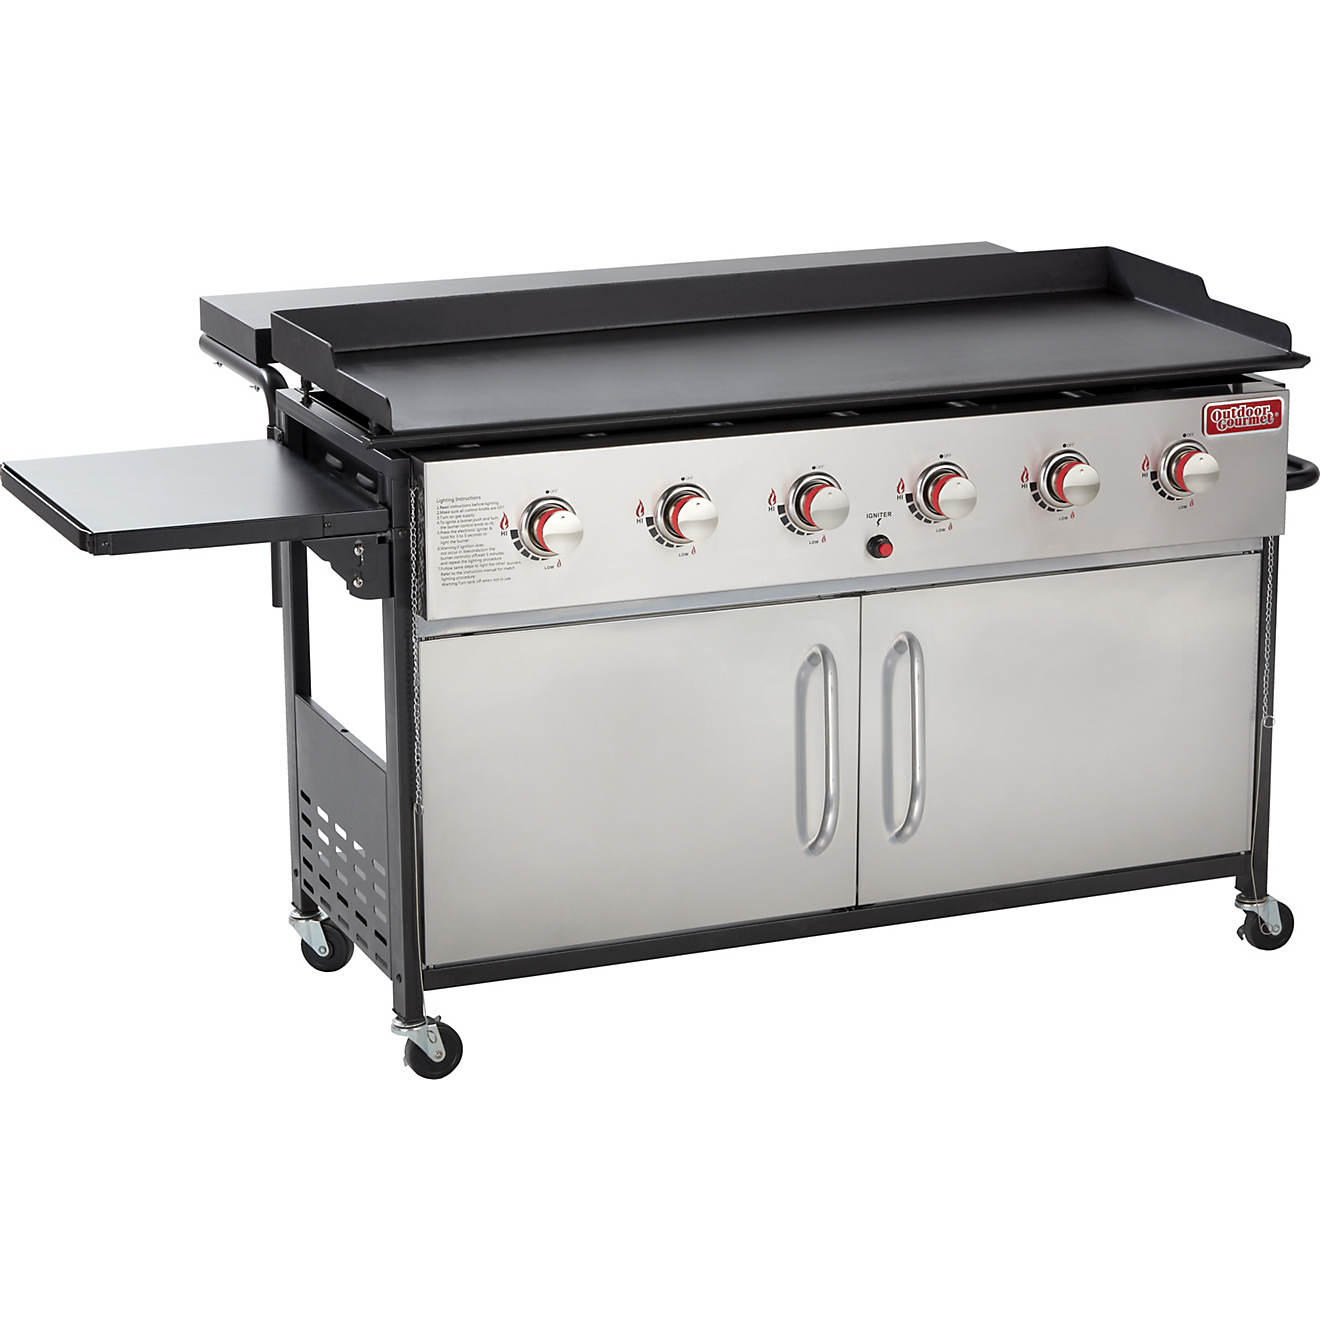 Outdoor Gourmet 6 Burner Stainless, Outdoor Propane Griddle Grill